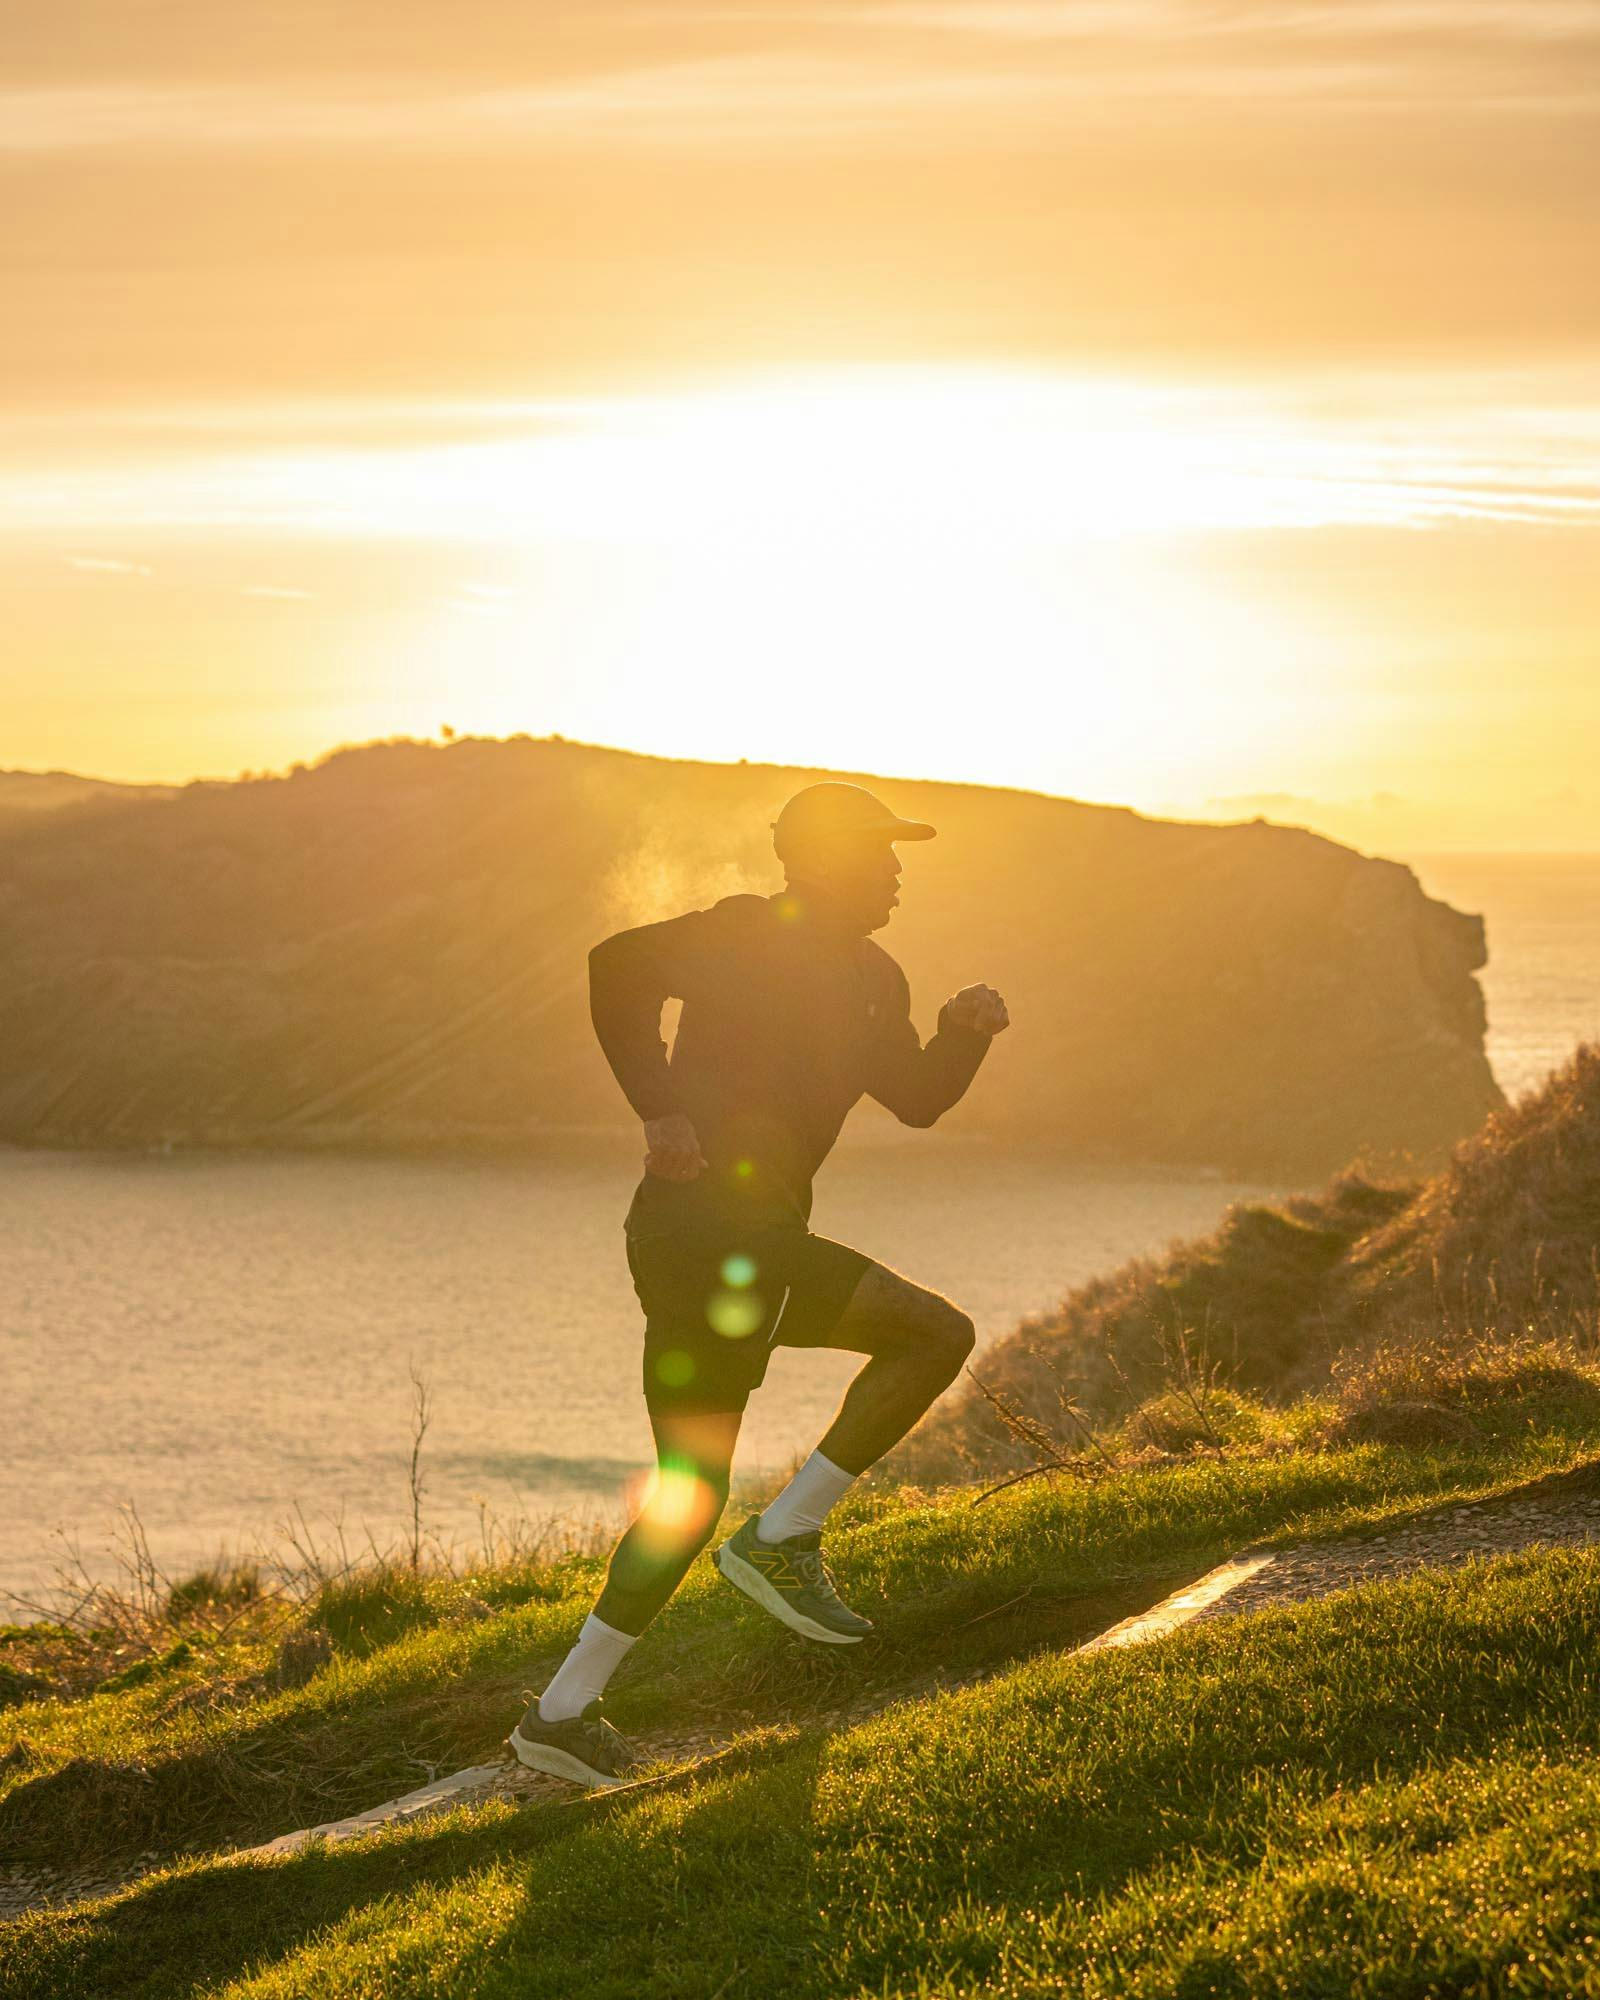 beginners-guide-to-trail-running